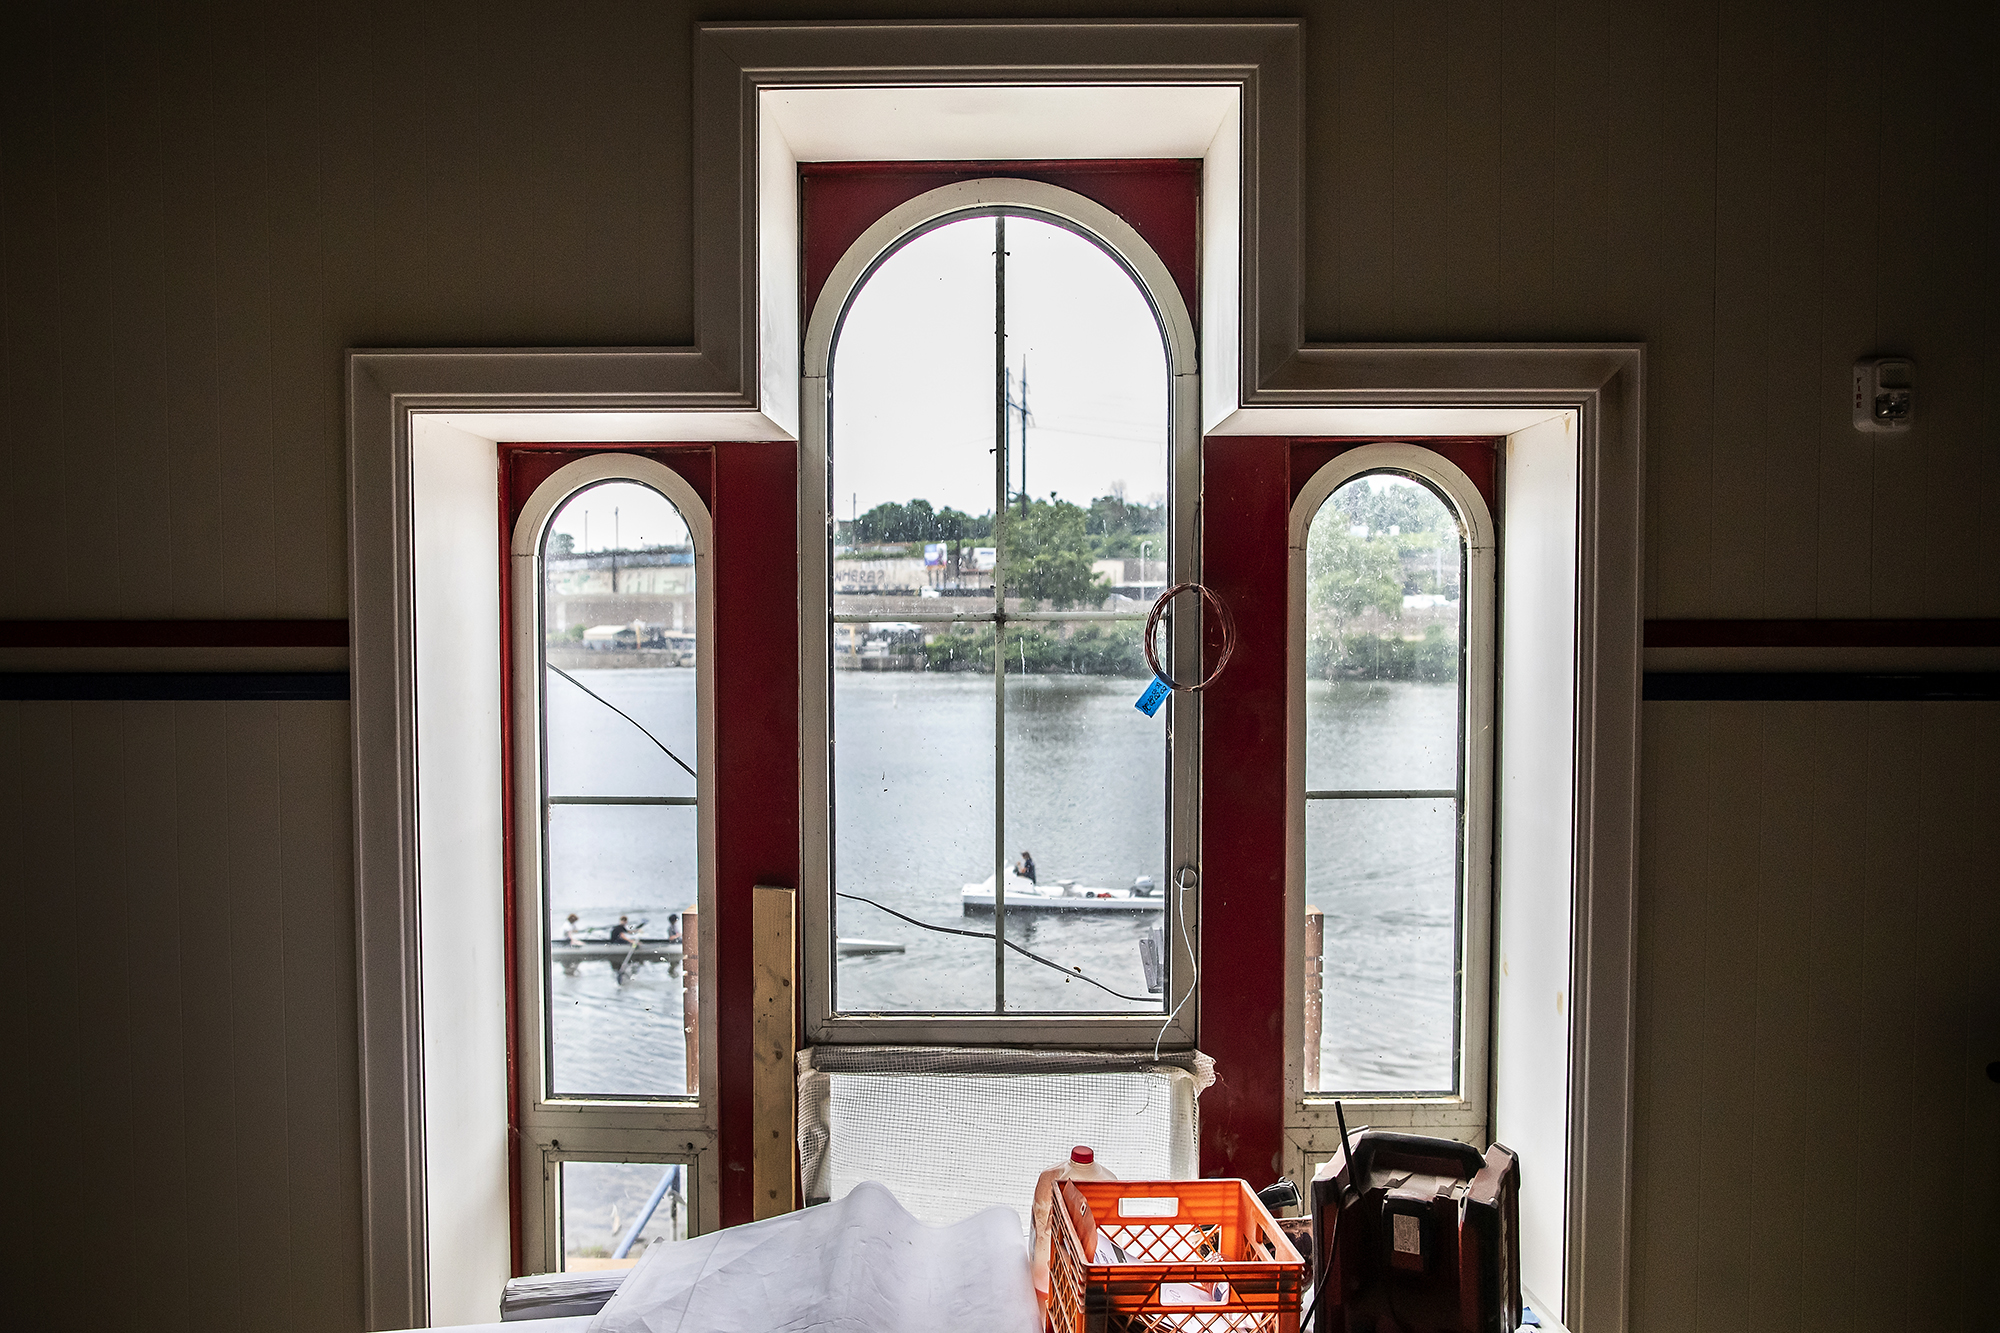 View of the Schuykill River through windows in the Penn Boathouse.